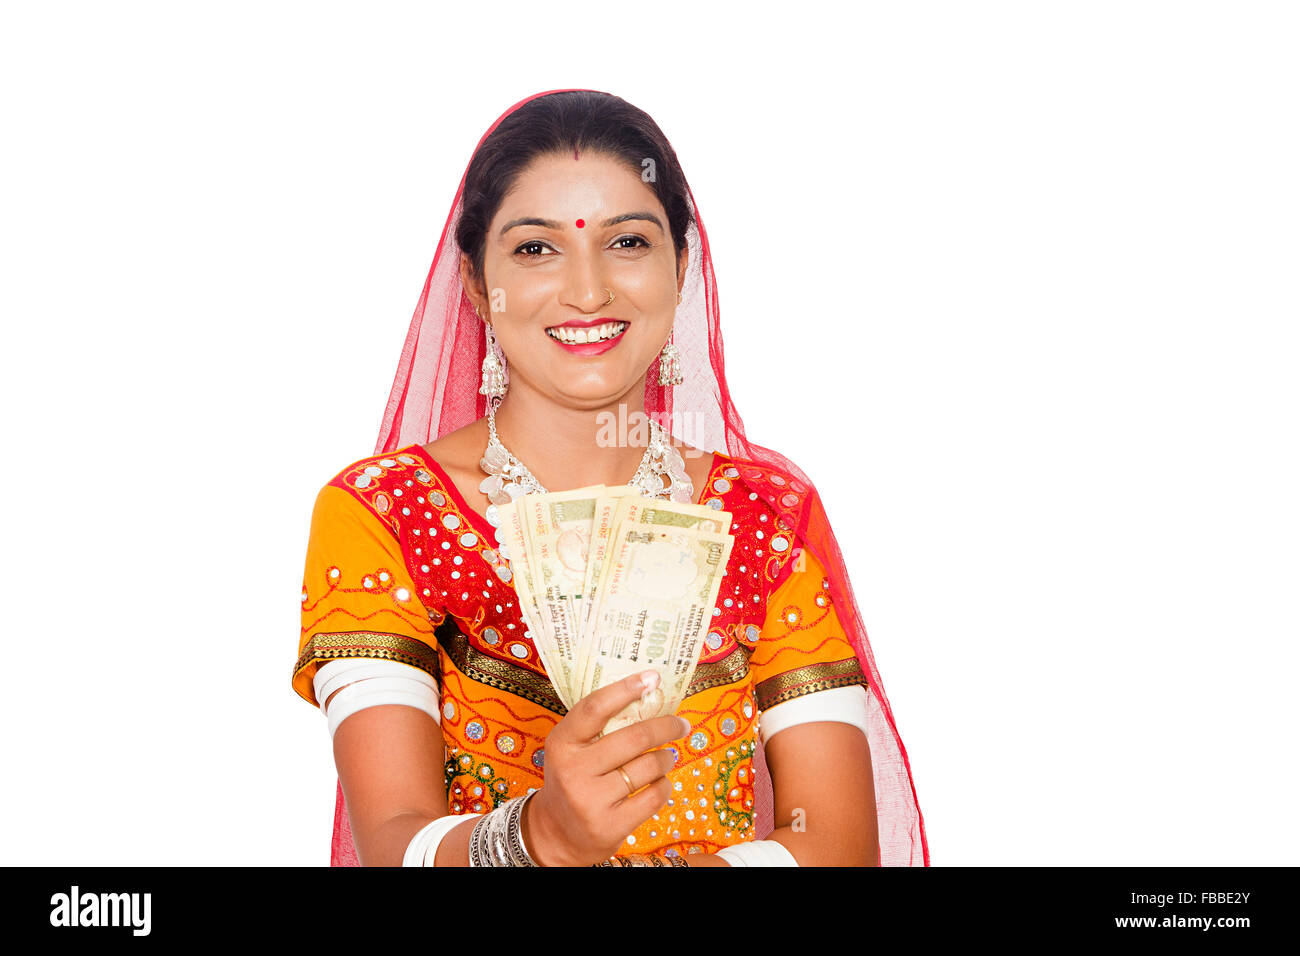 1 indian rural Gujrati woman Money showing Stock Photo